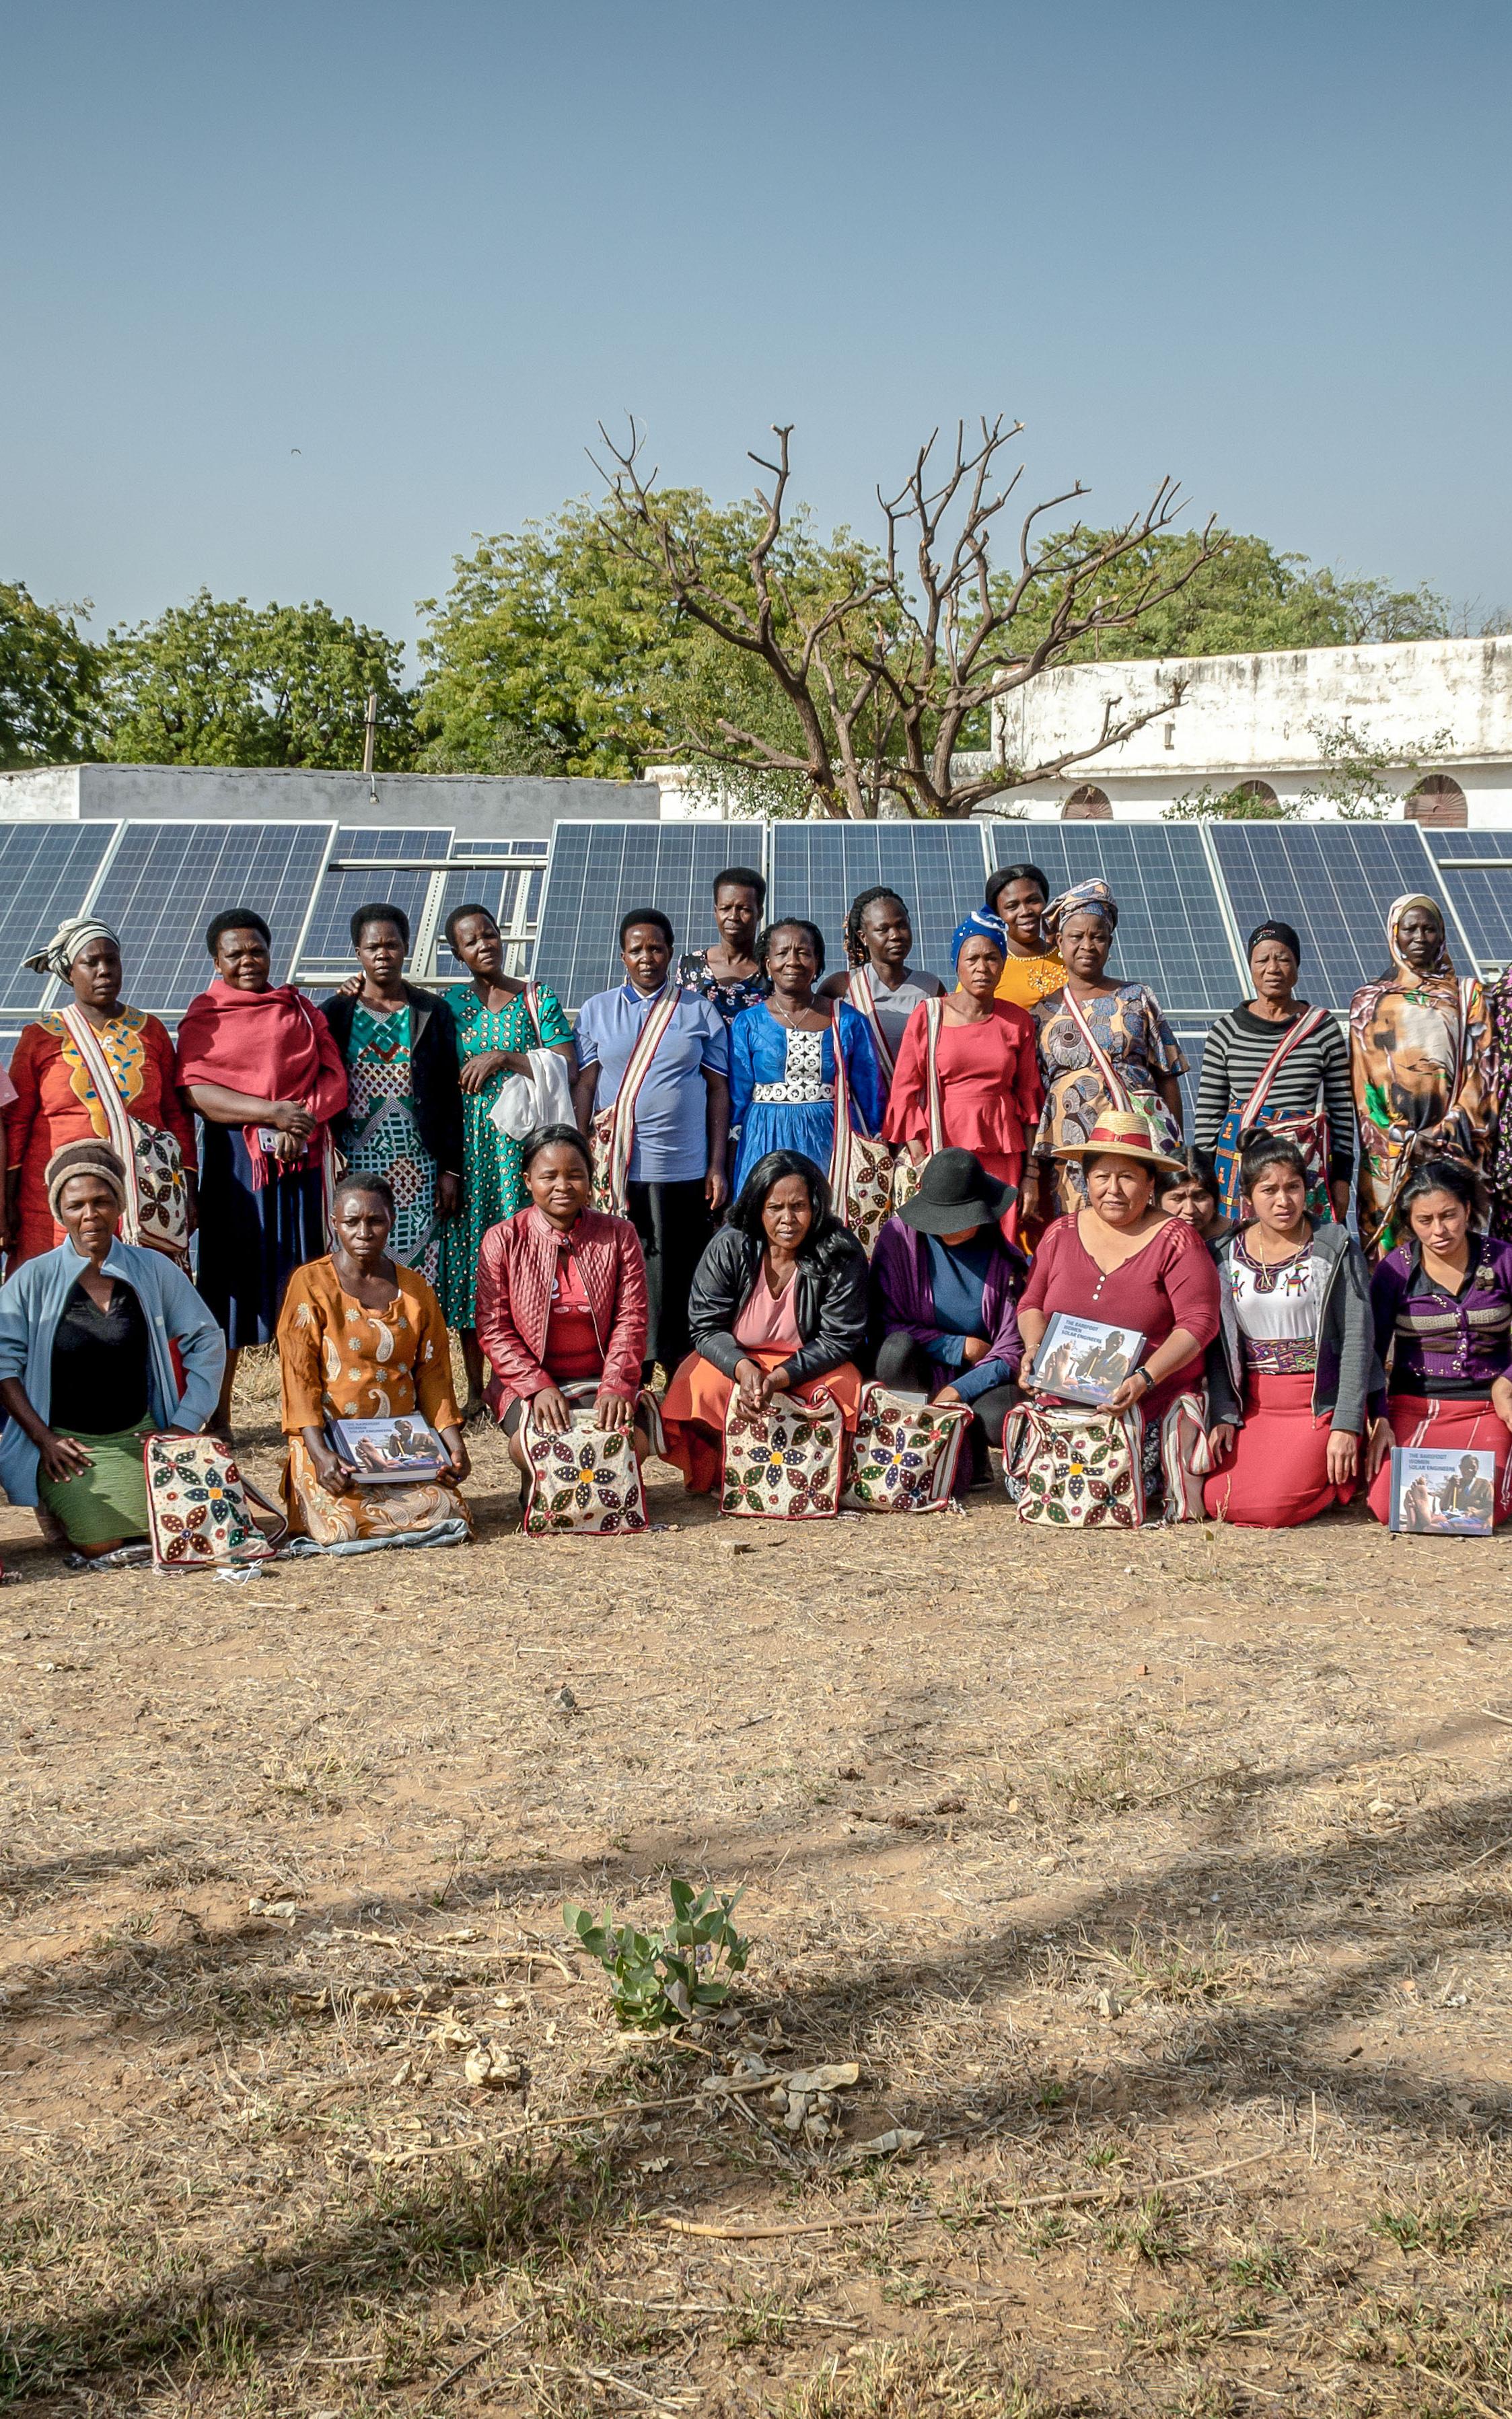 Beautiful News-Women standing in front of solar panels.